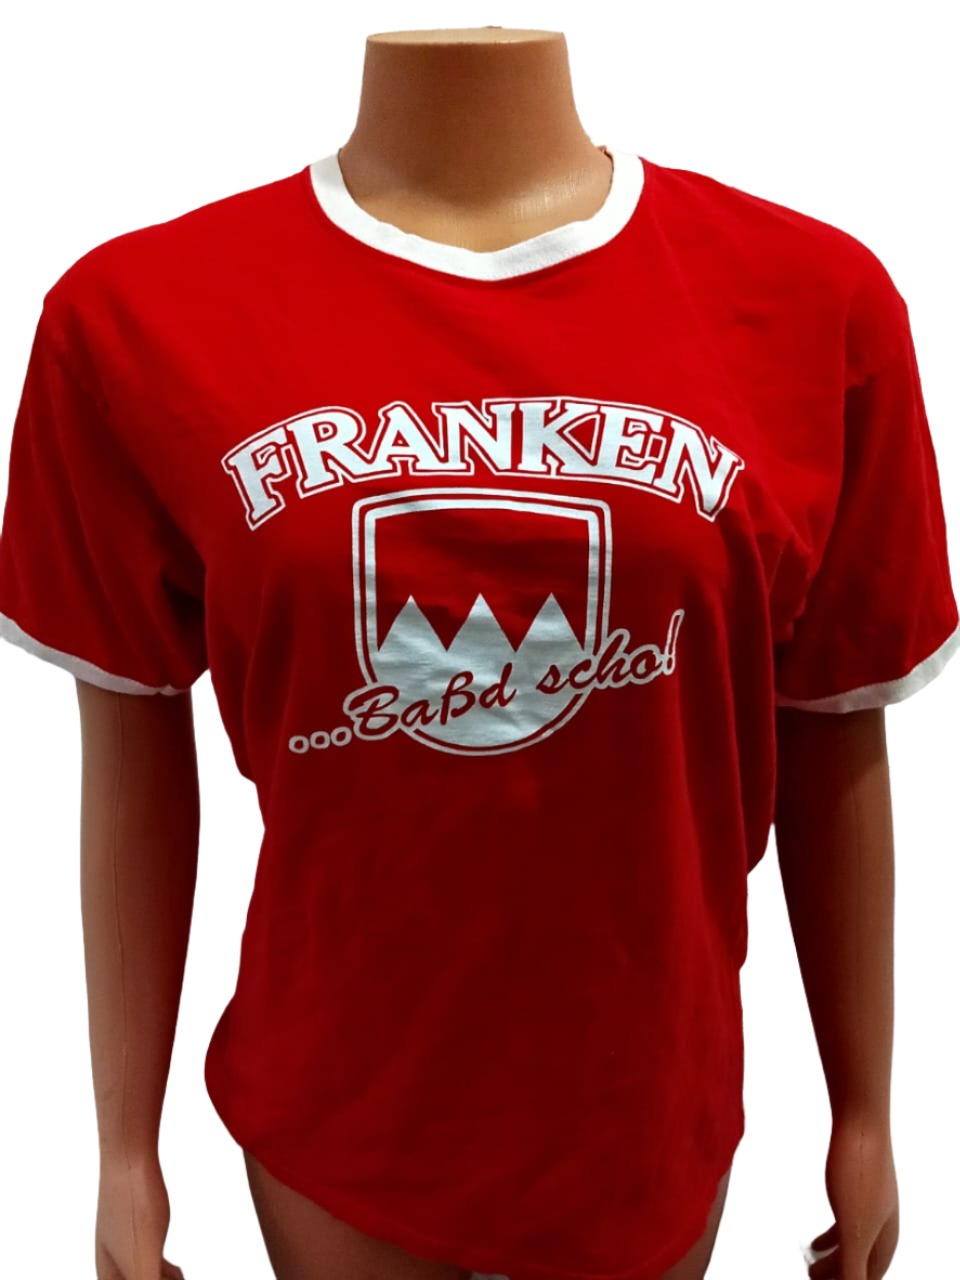 Franken Red and White Polo T-Shirt (Unisex) | GWDL12